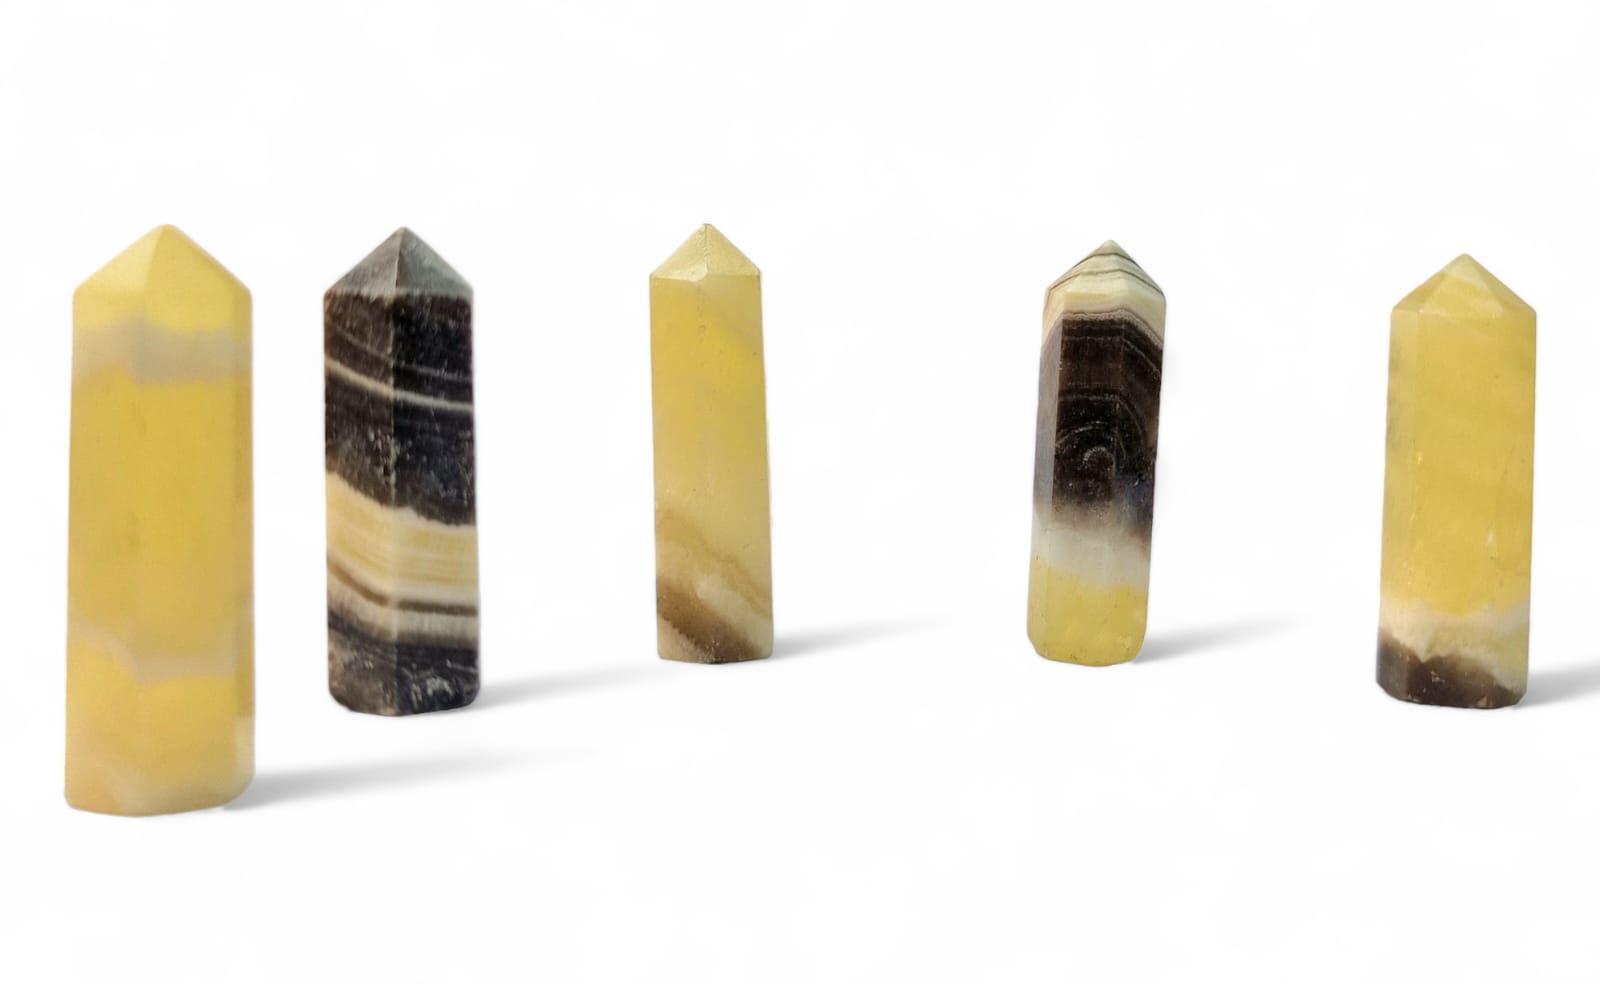 GeoFossils Zebra Calcite Mini Towers Black, Yellow, White approx 30mm tall